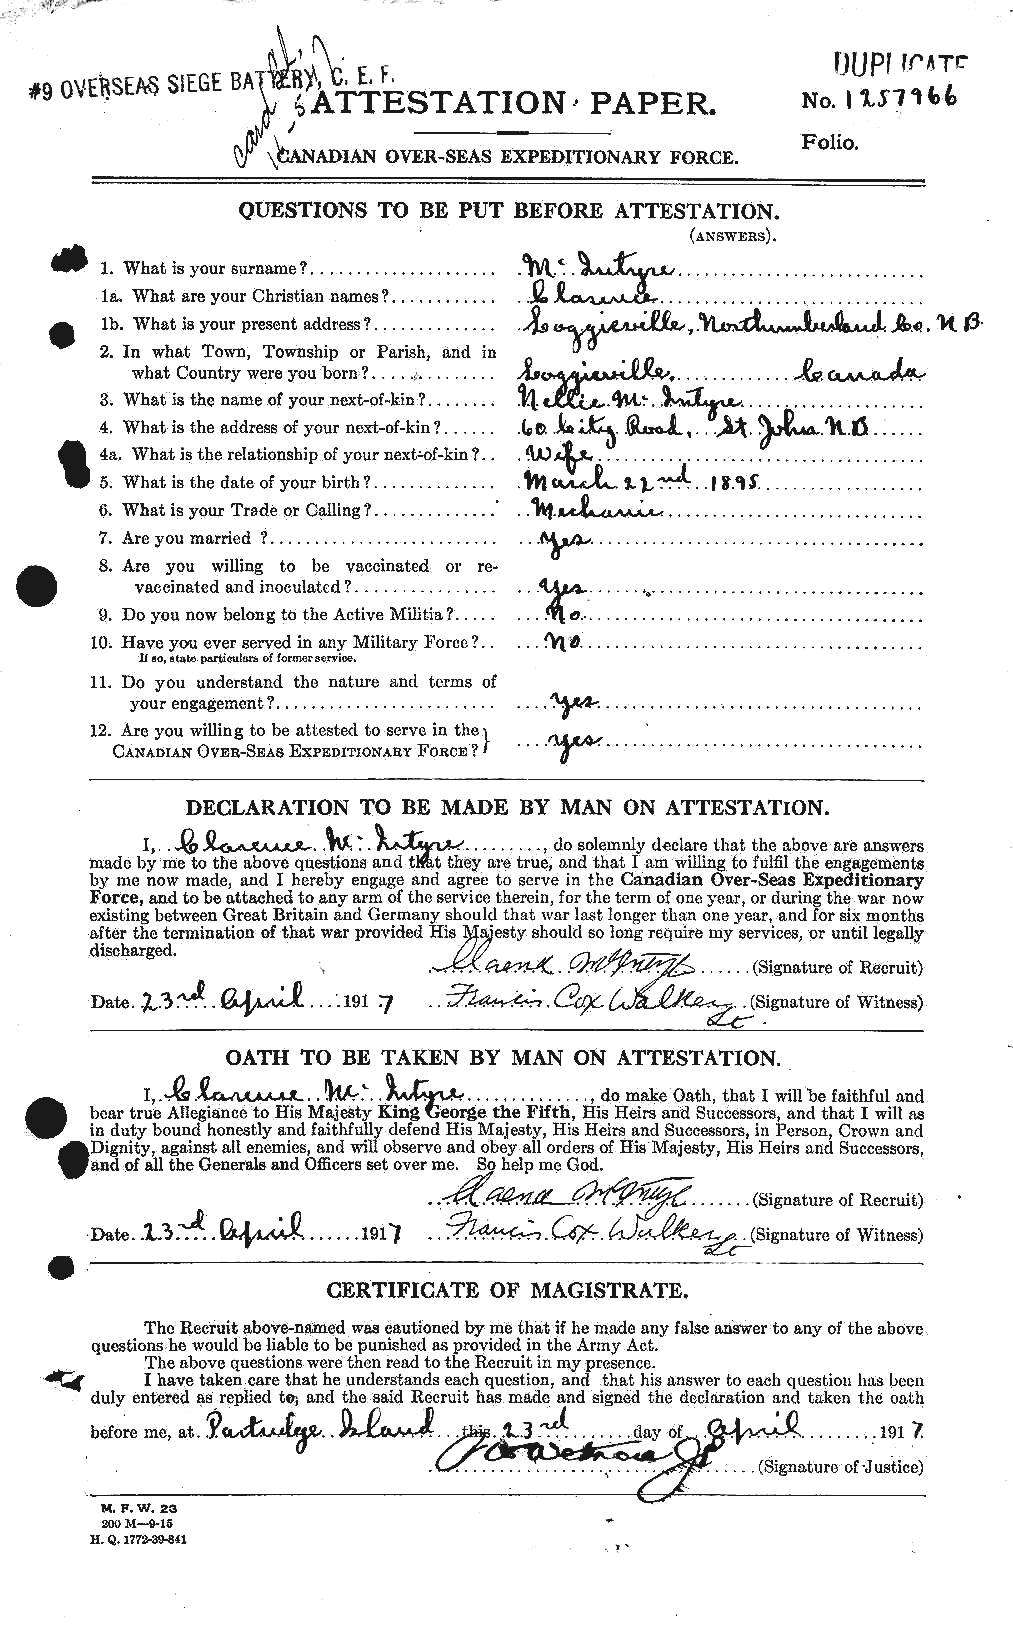 Personnel Records of the First World War - CEF 527281a